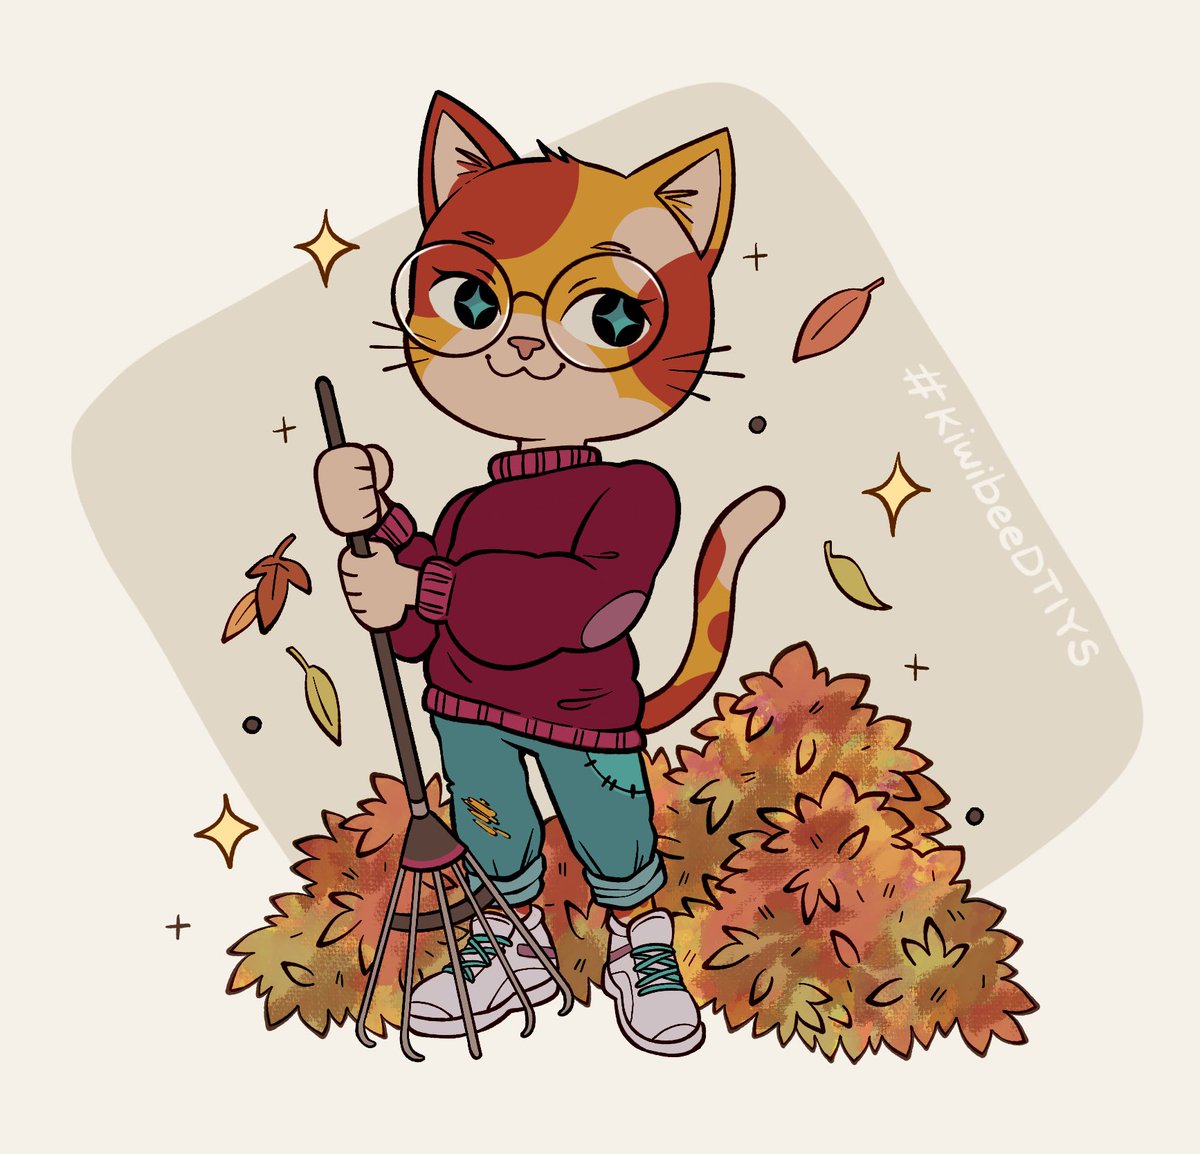 solo furry sweater tail sparkle broom red sweater  illustration images